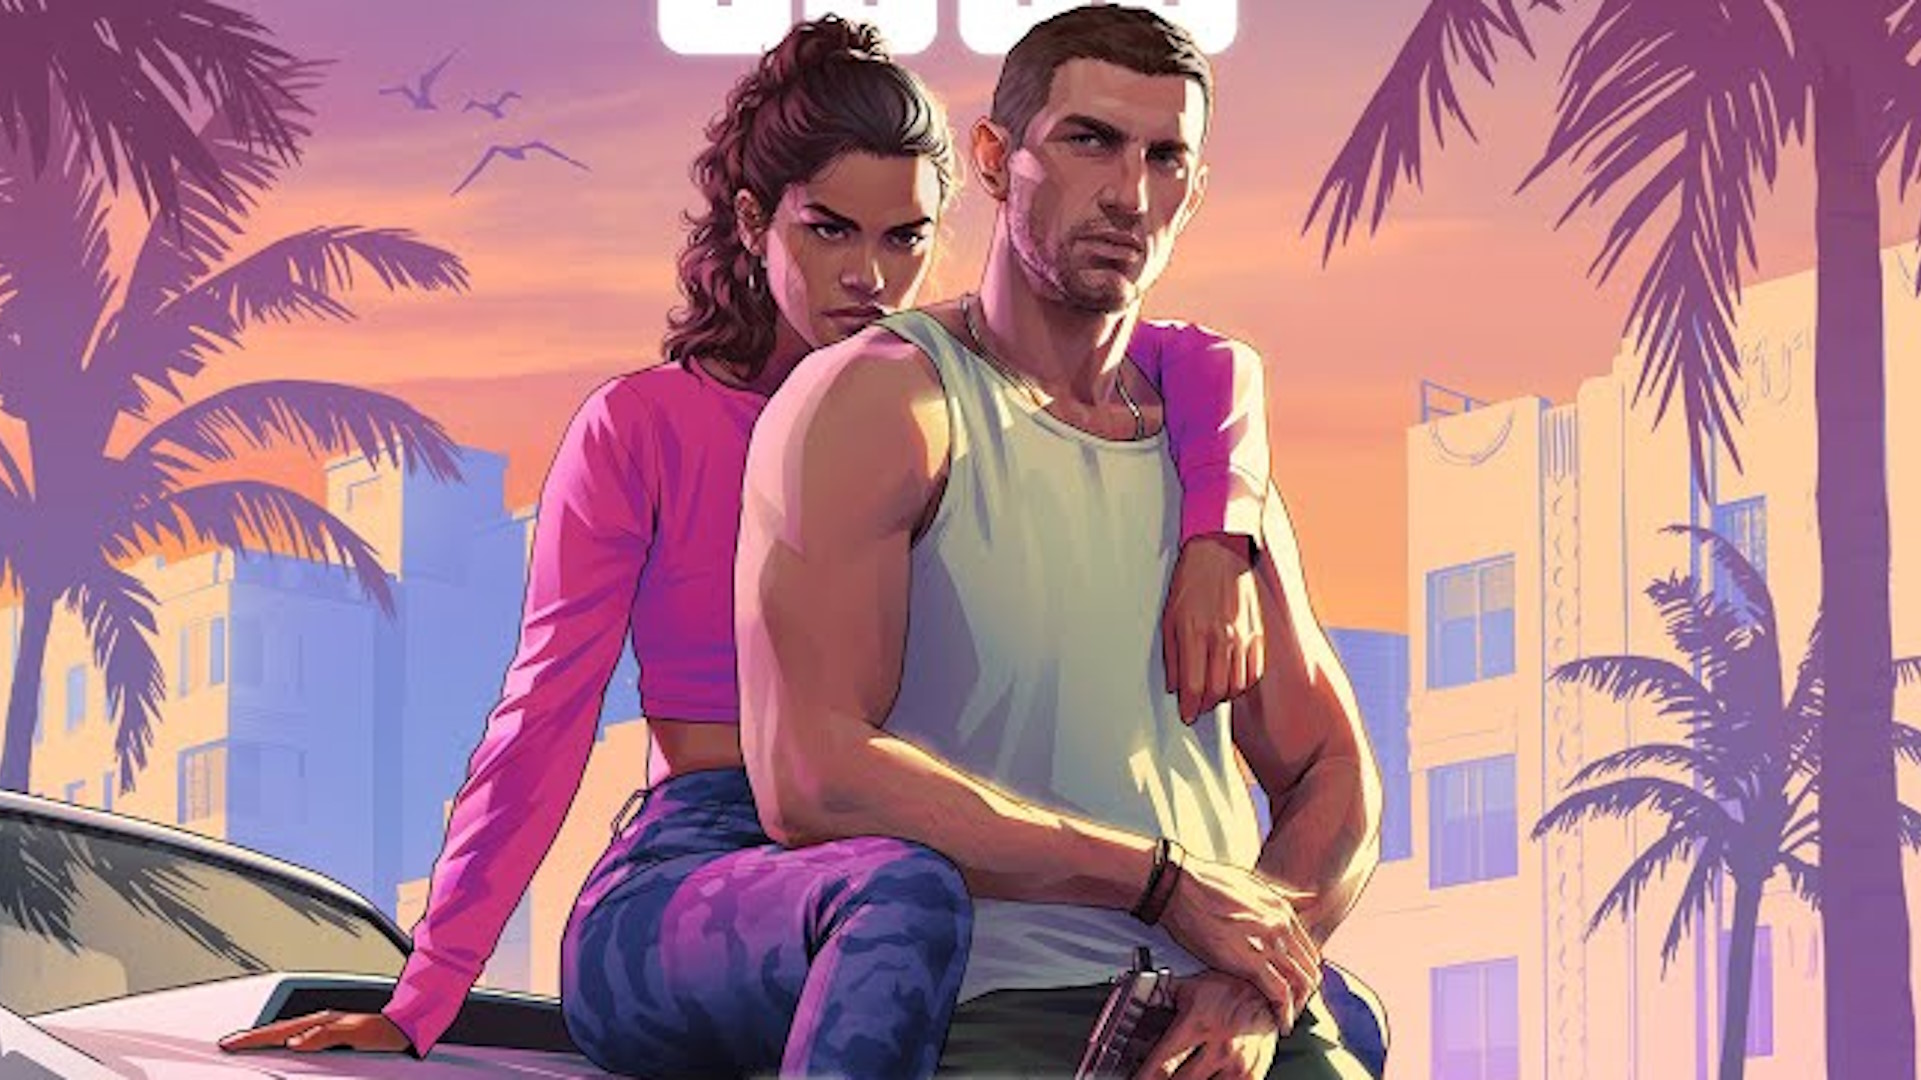 Grand Theft Auto 6 release window narrowed to fall 2025, but there’s still no PC launch date confirmed